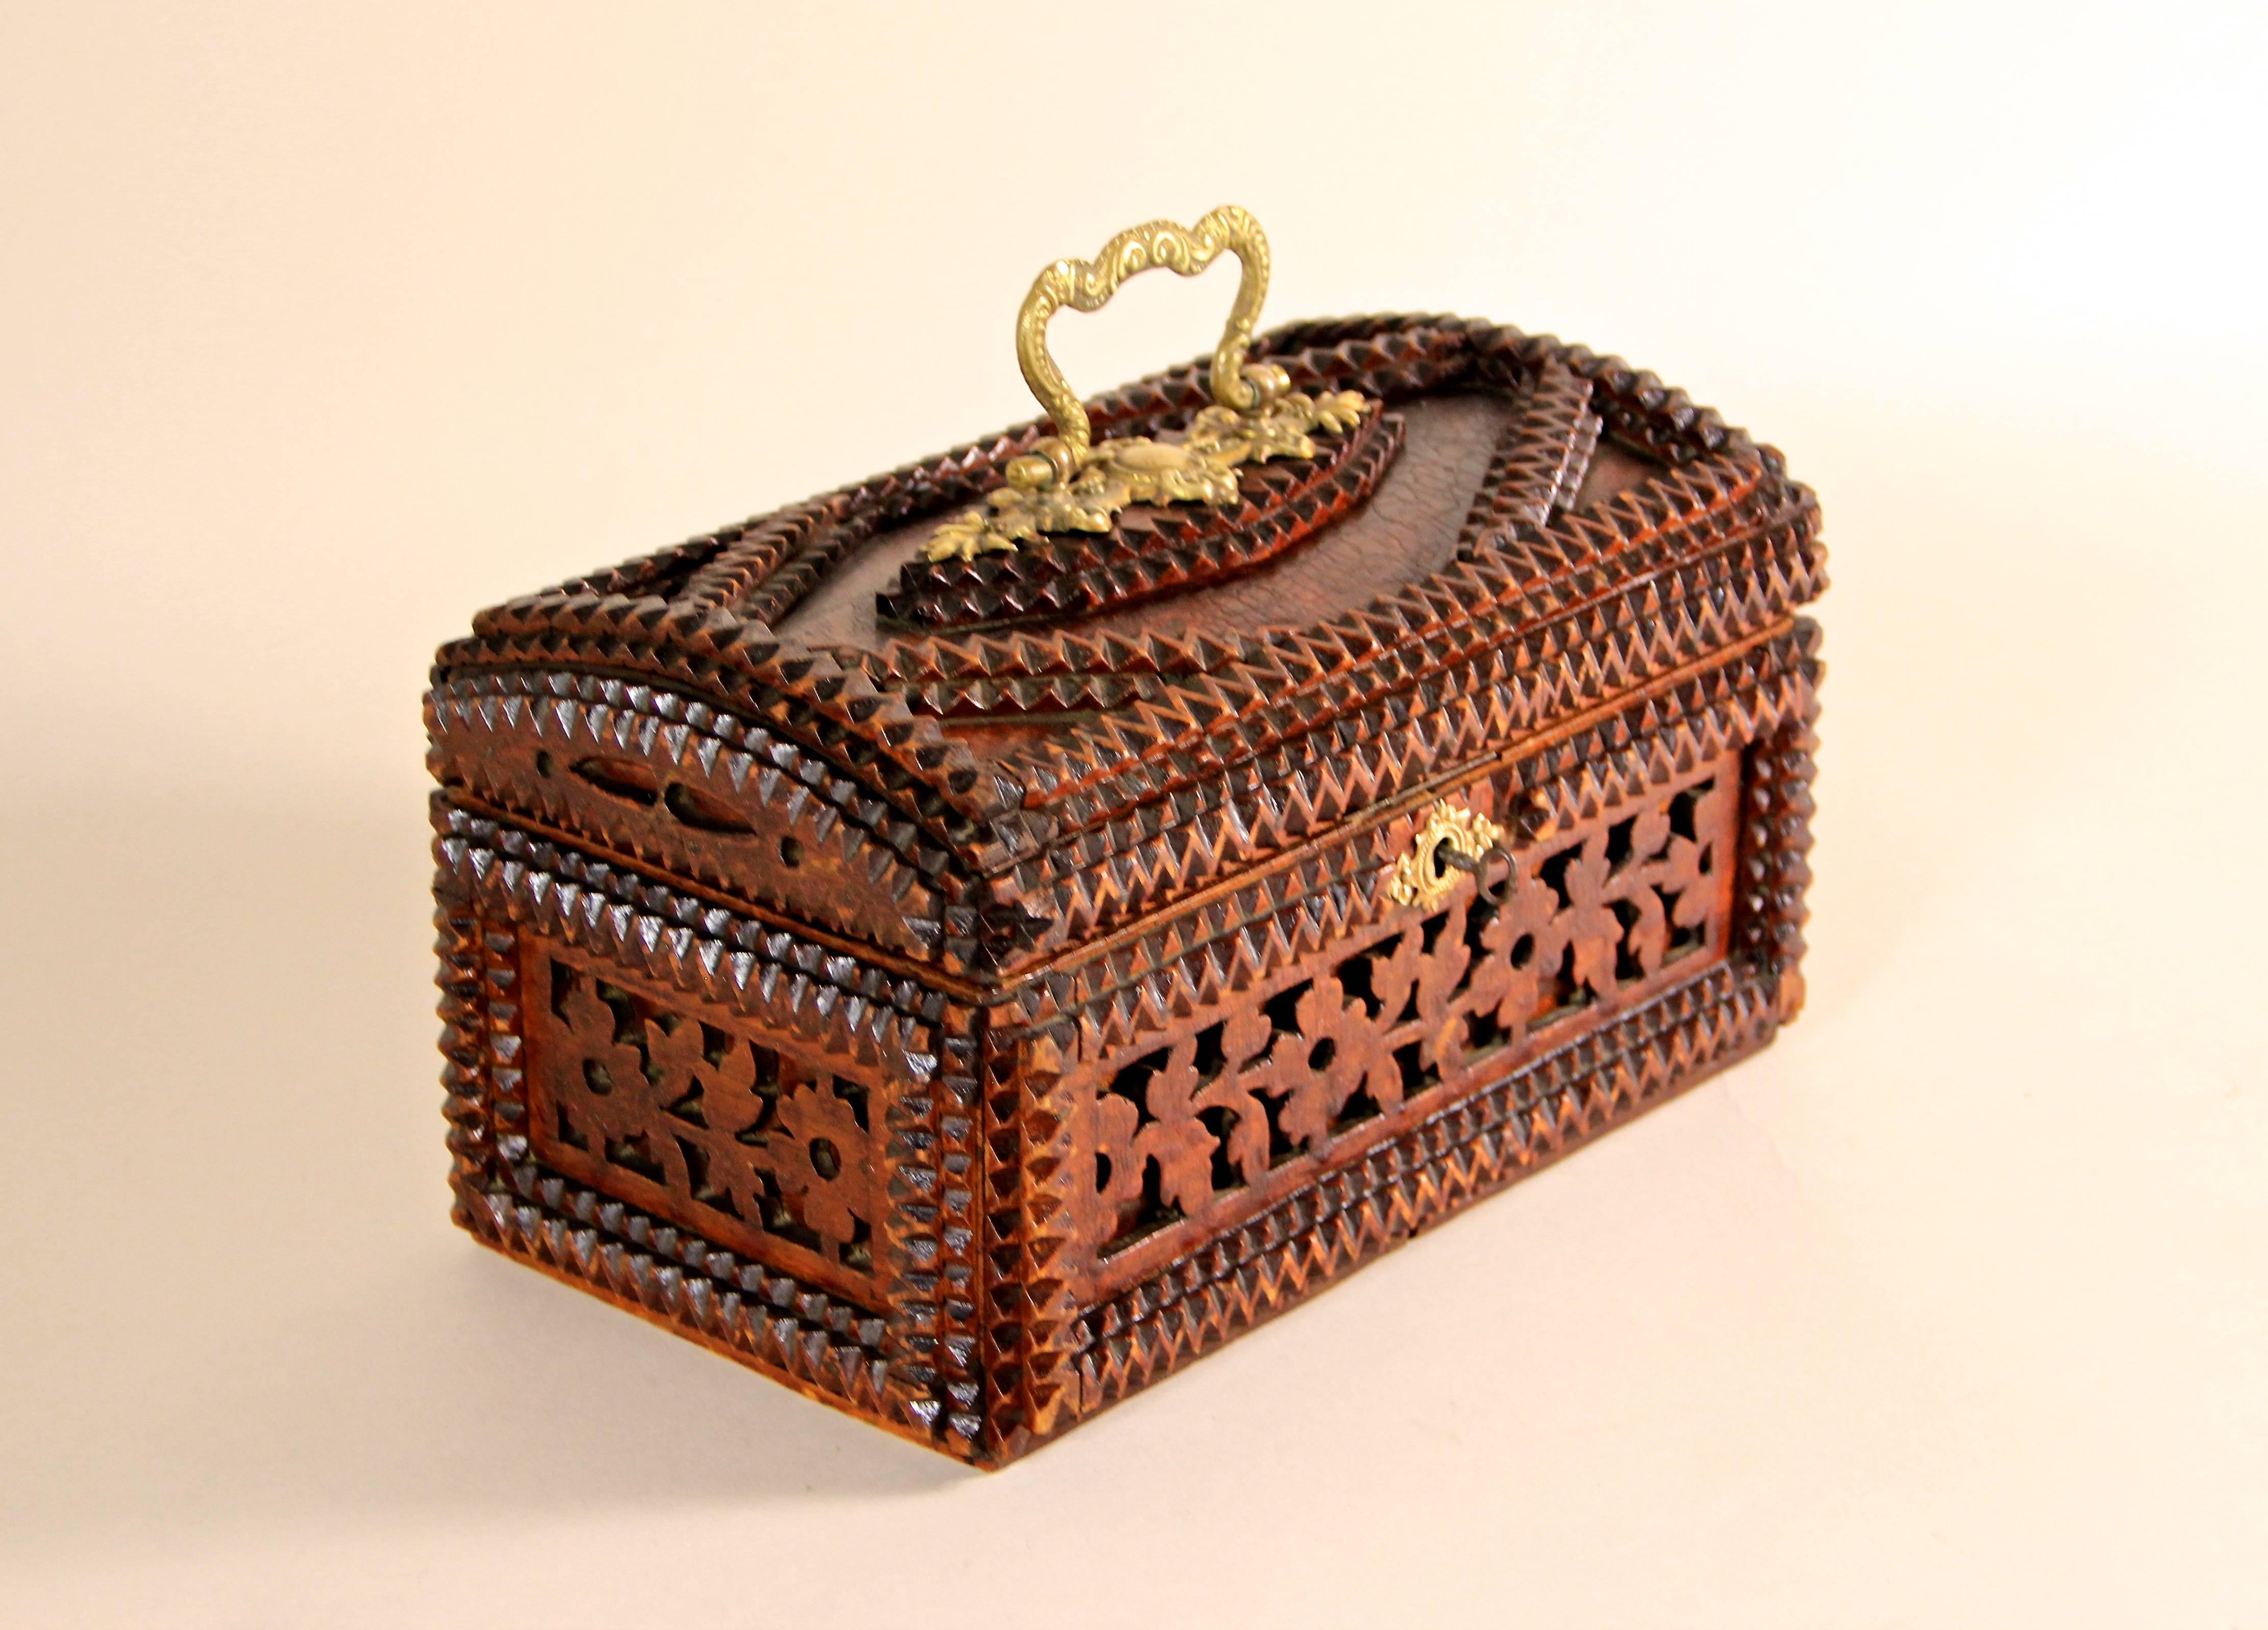 Another fine box in our collection is this exceptional Tramp Art Box from the late 19th century, the so called historism era. Made out of many single hand-carved pieces, this Tramp Art box offers an absolute unique design with flower carvings